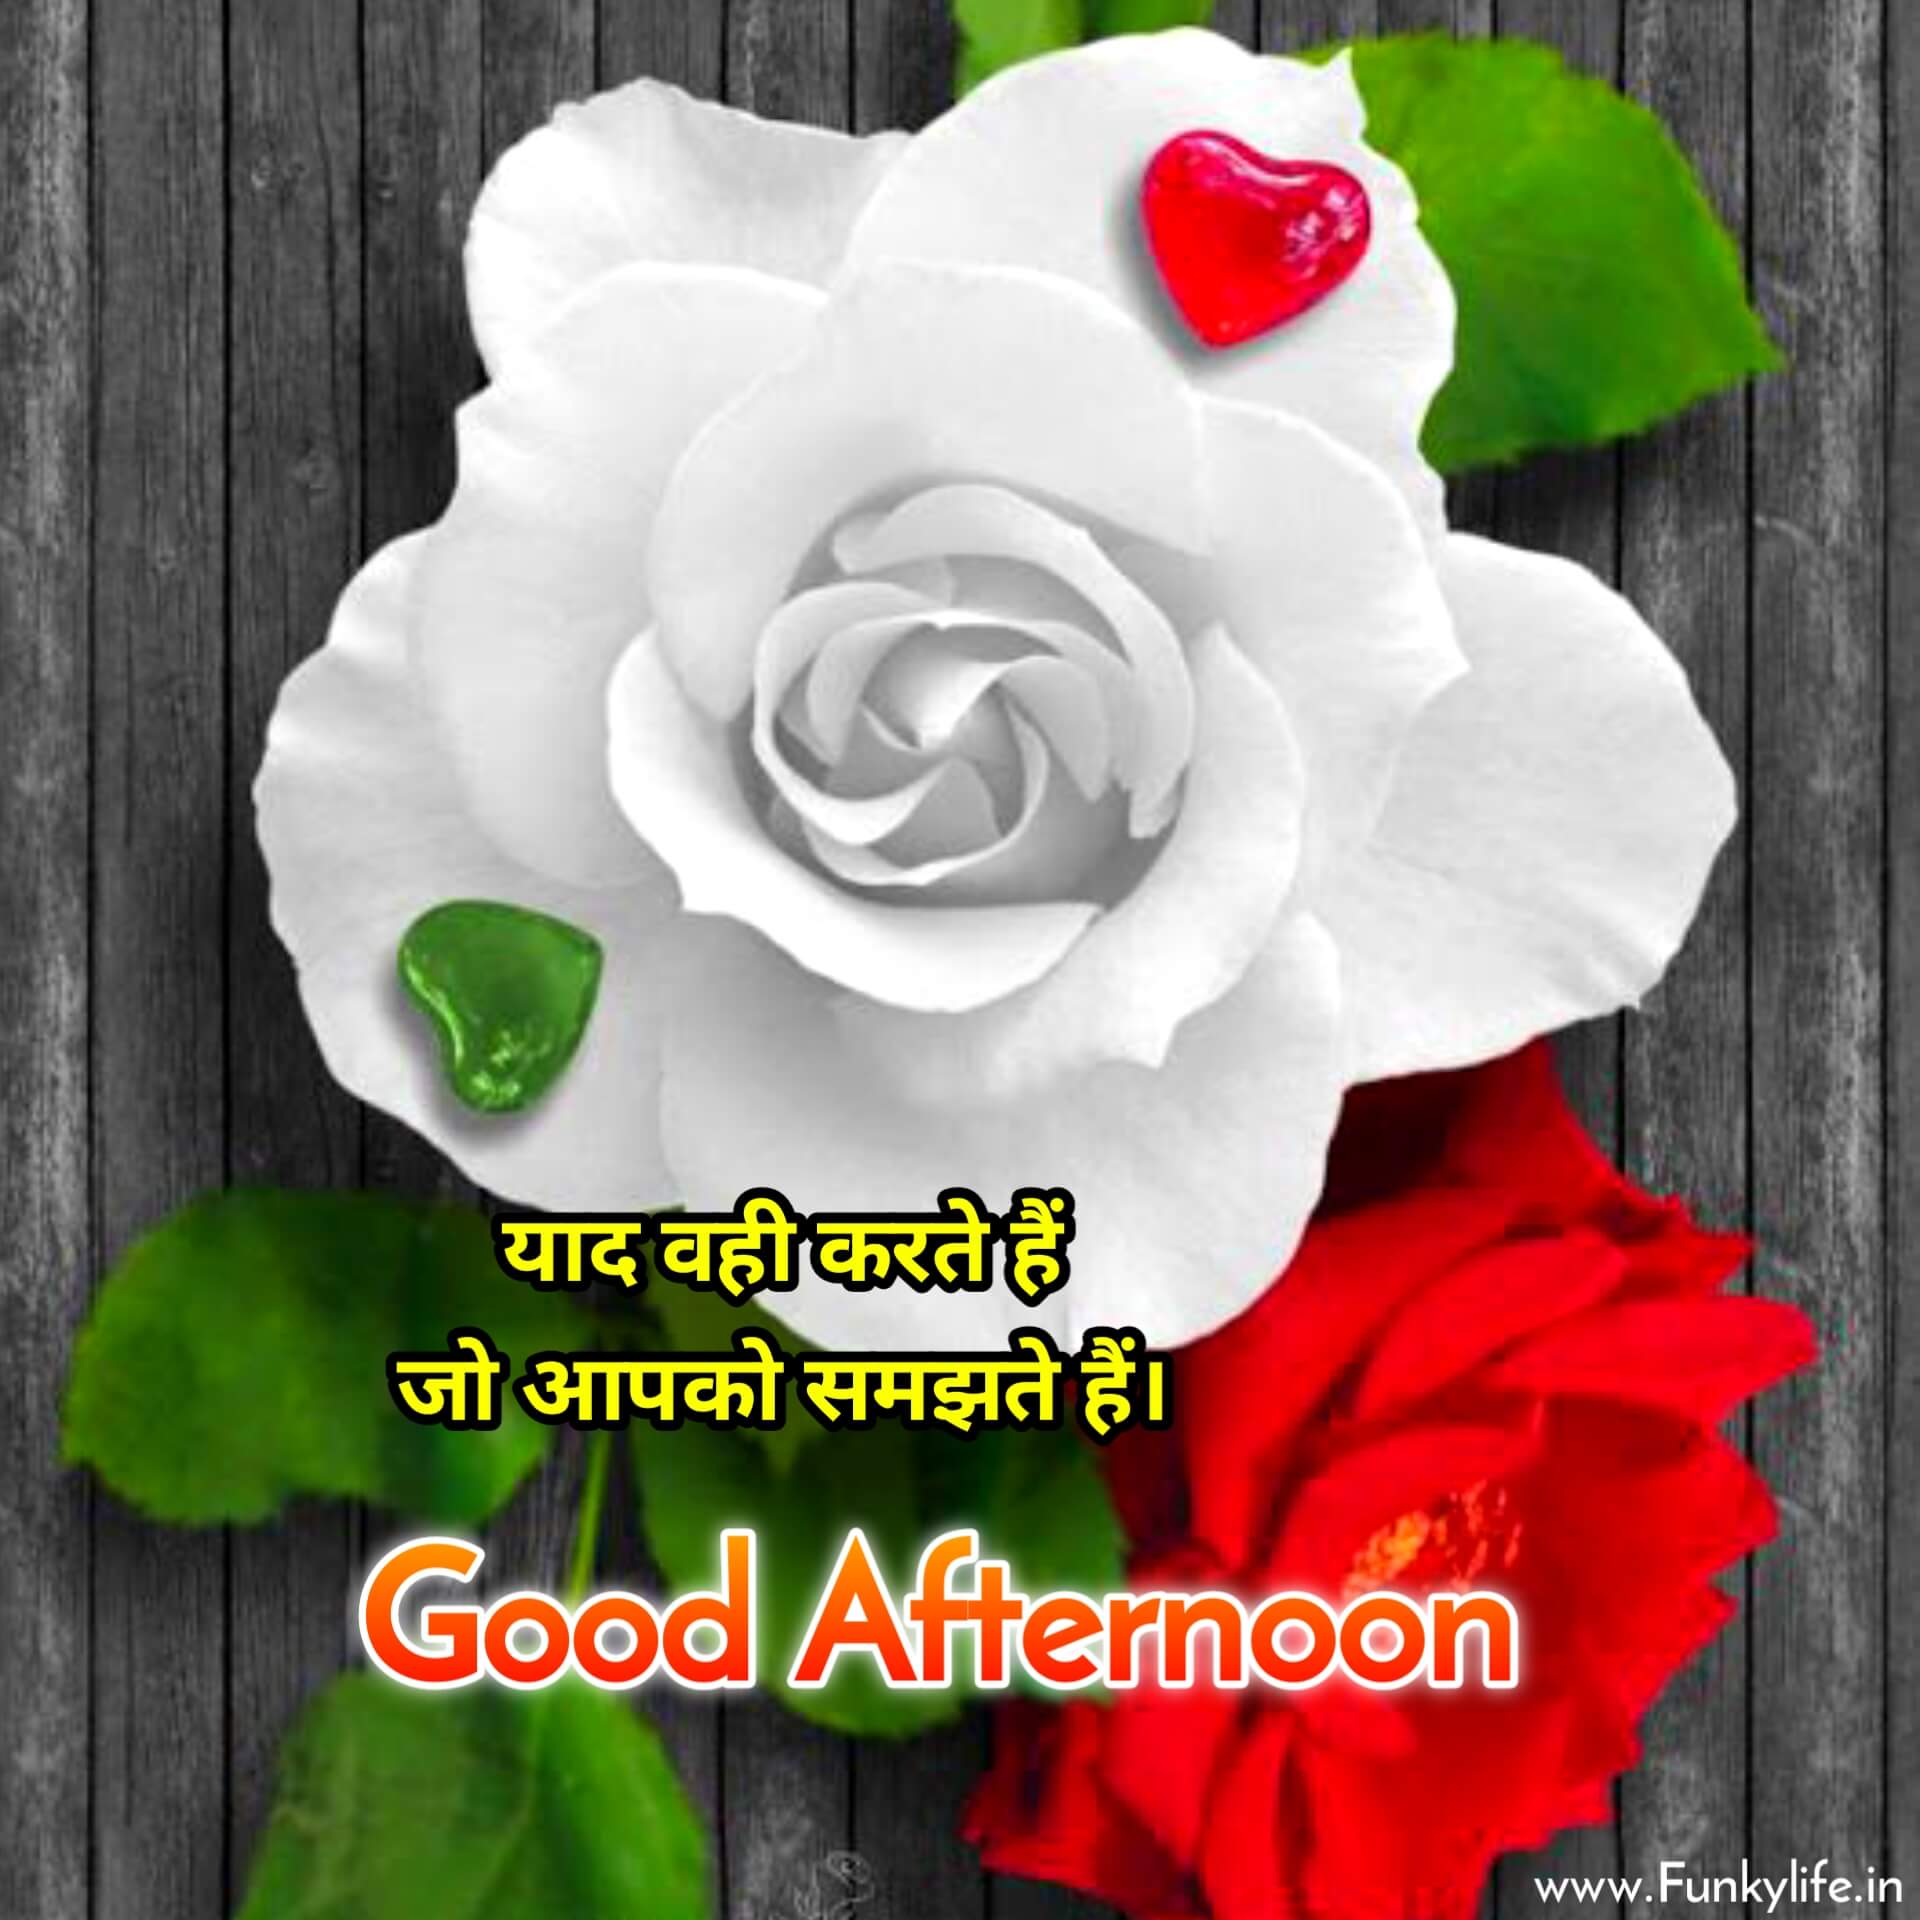 Flower Good Afternoon Image in Hindi